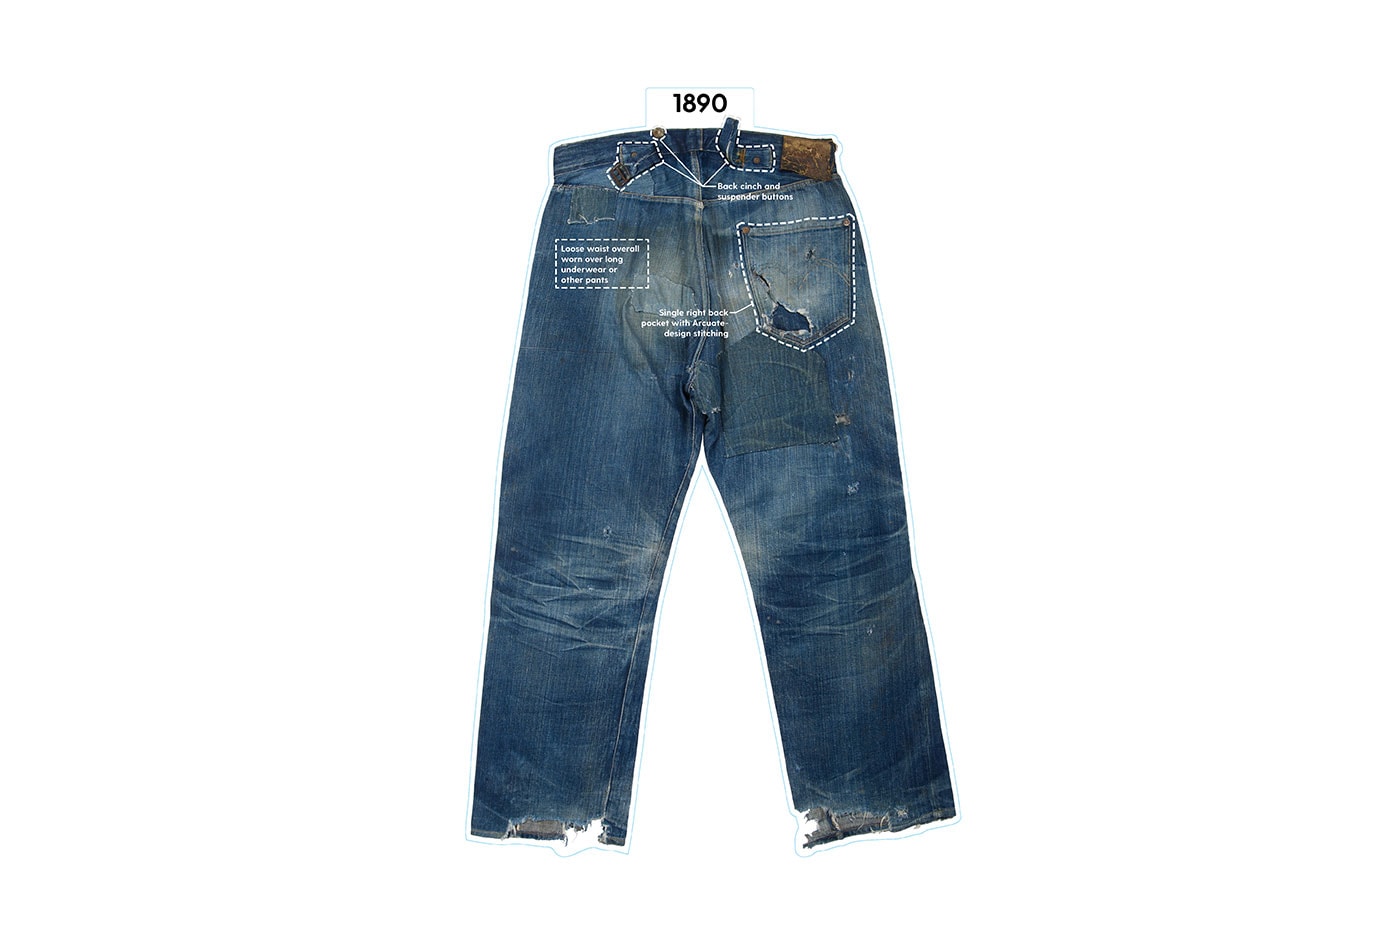 Rediscovering the Levi's 501 The World's First Blue Jeans metal rivets patent levi strauss feature info